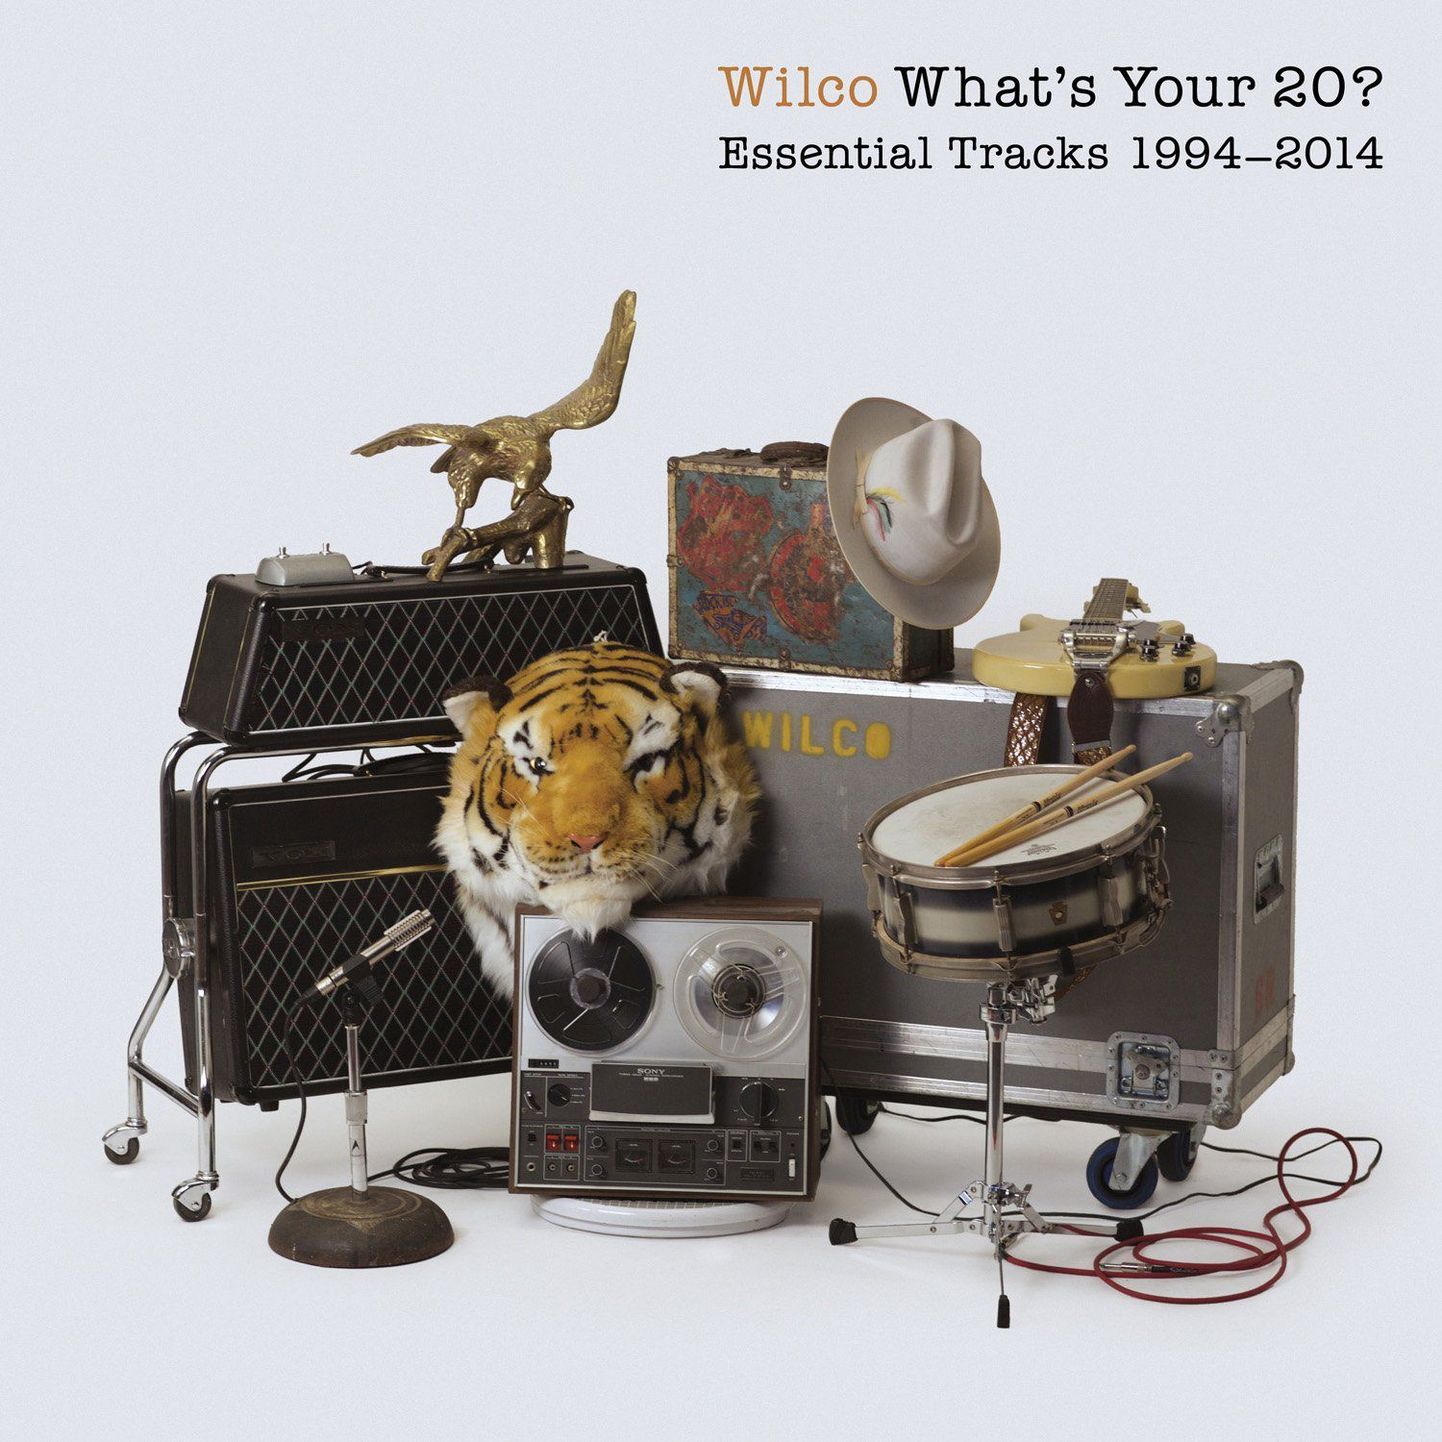 Wilco- What's Your 20? Essential Tracks 1994 – 2014